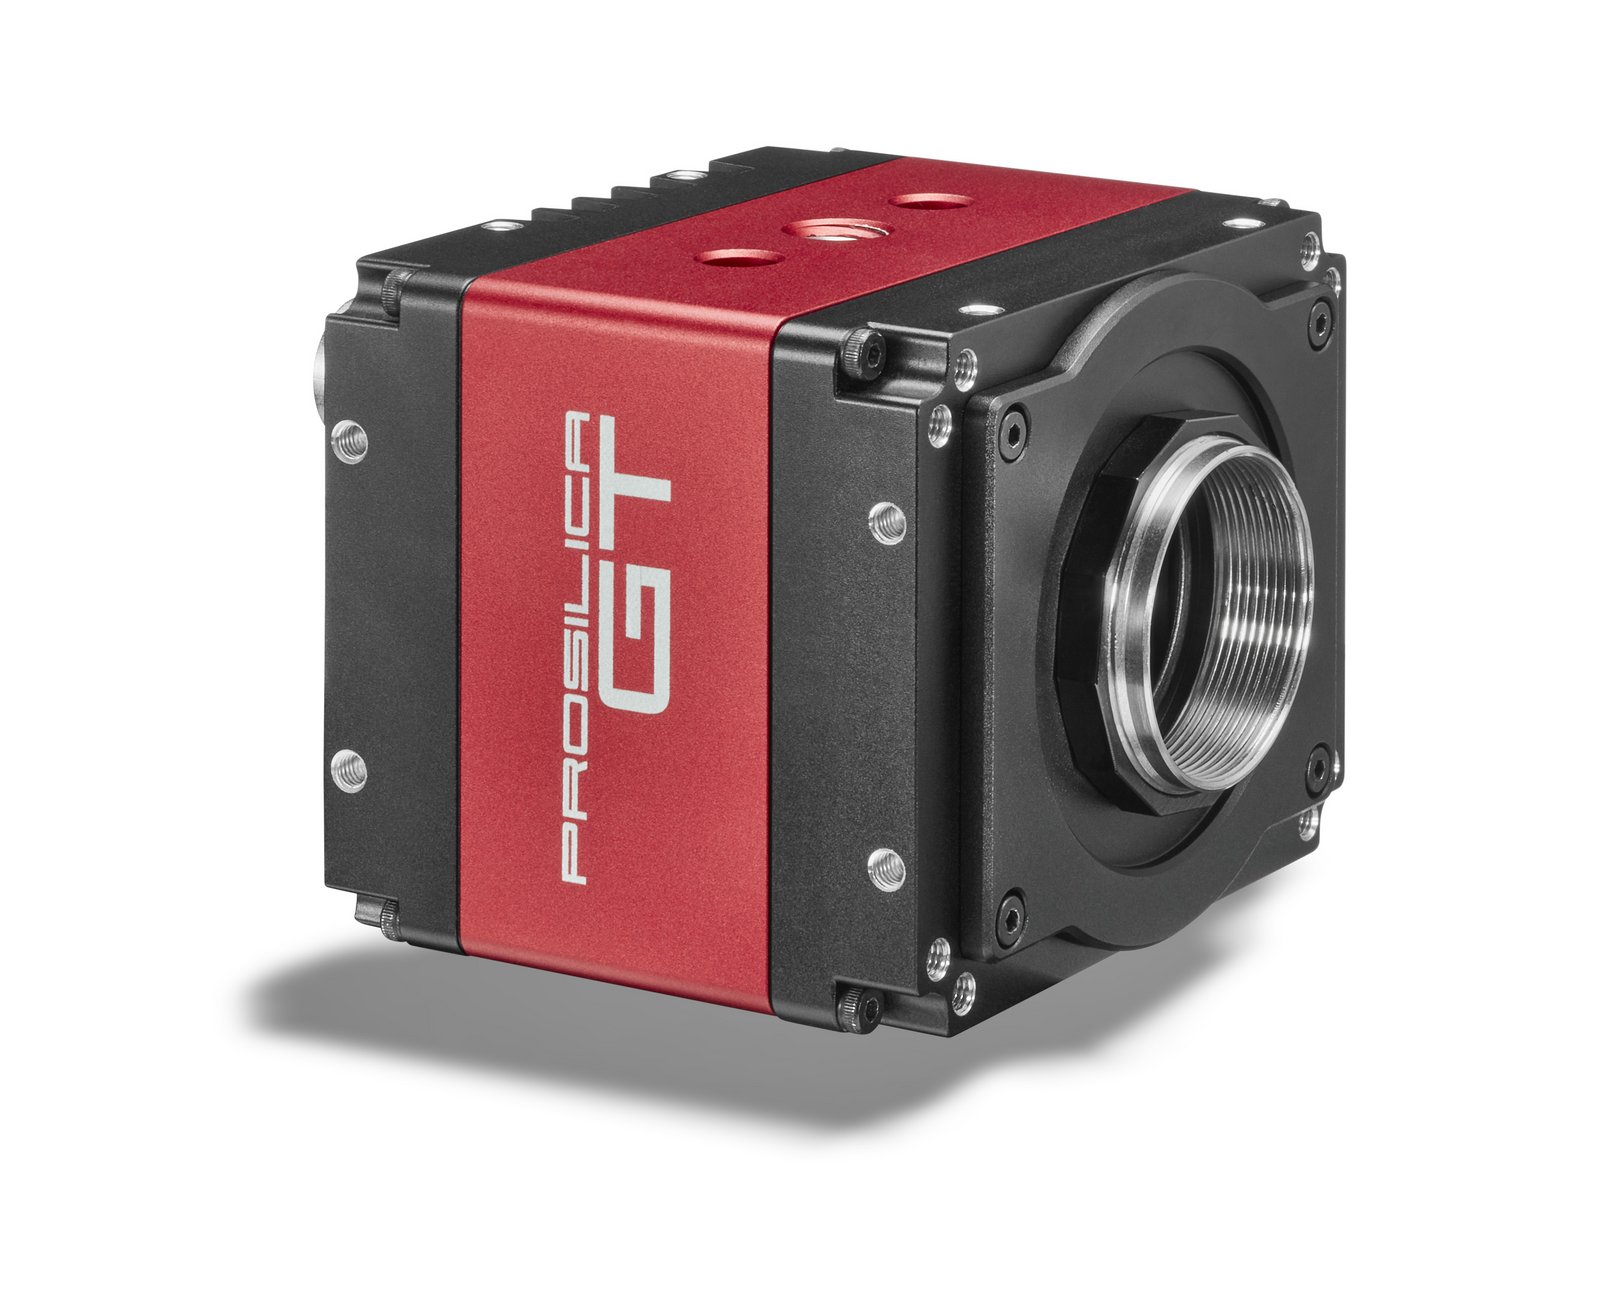 New high-resolution Prosilica GT cameras with C-Mount